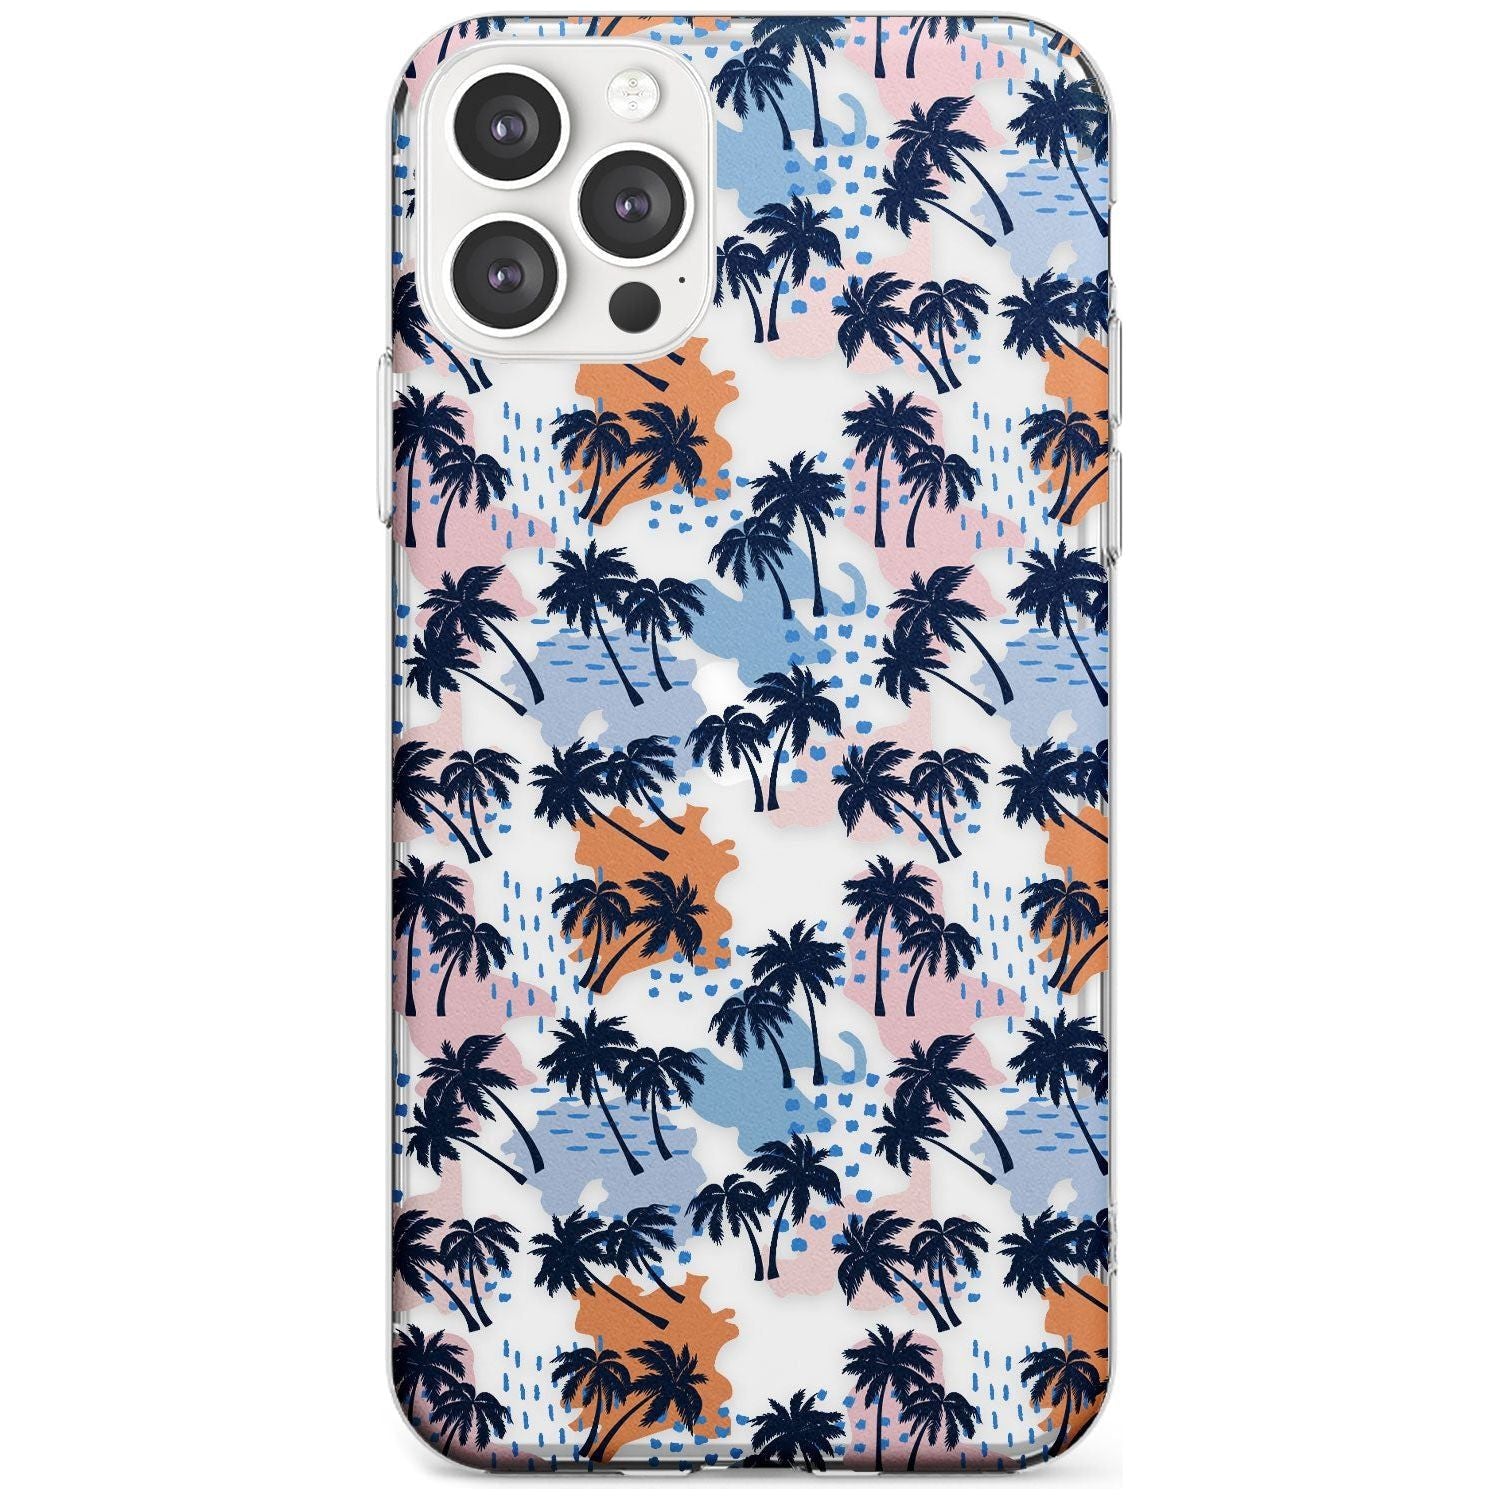 Summer Palm Trees (Clear) Black Impact Phone Case for iPhone 11 Pro Max